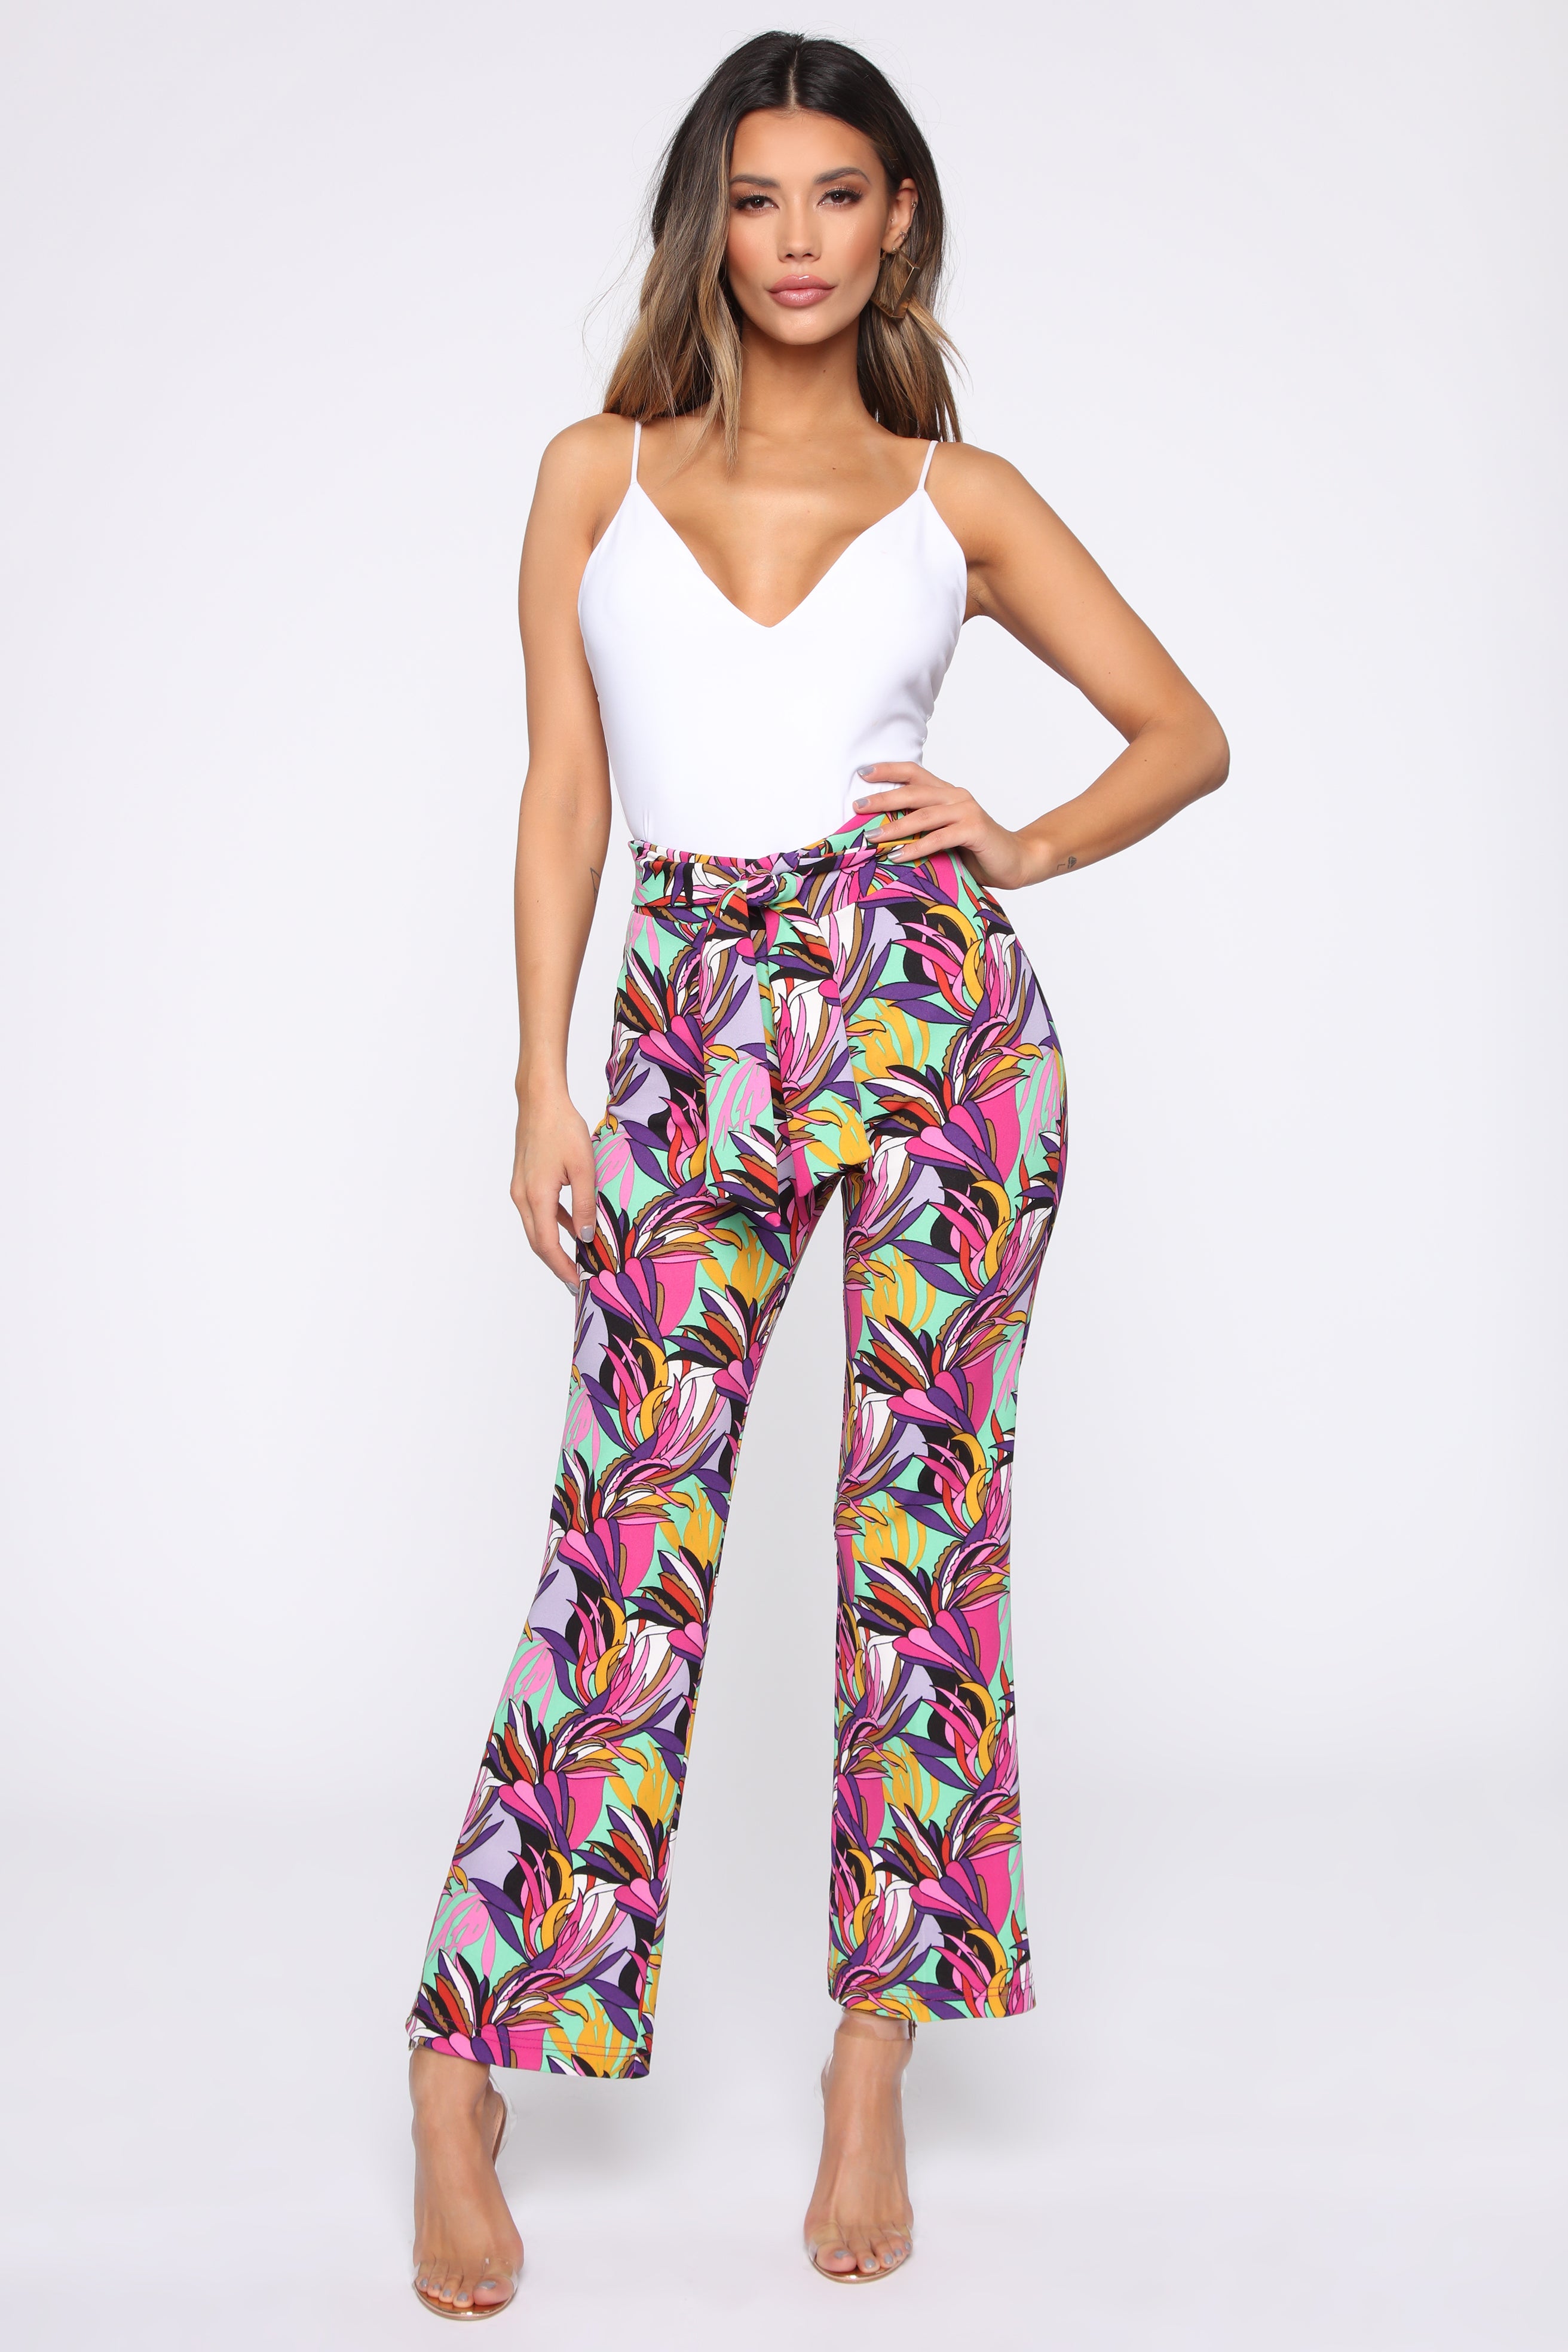 Bear Dance Boho Floral Print Flared Pants – WILD FLIER GIFTS AND APPAREL